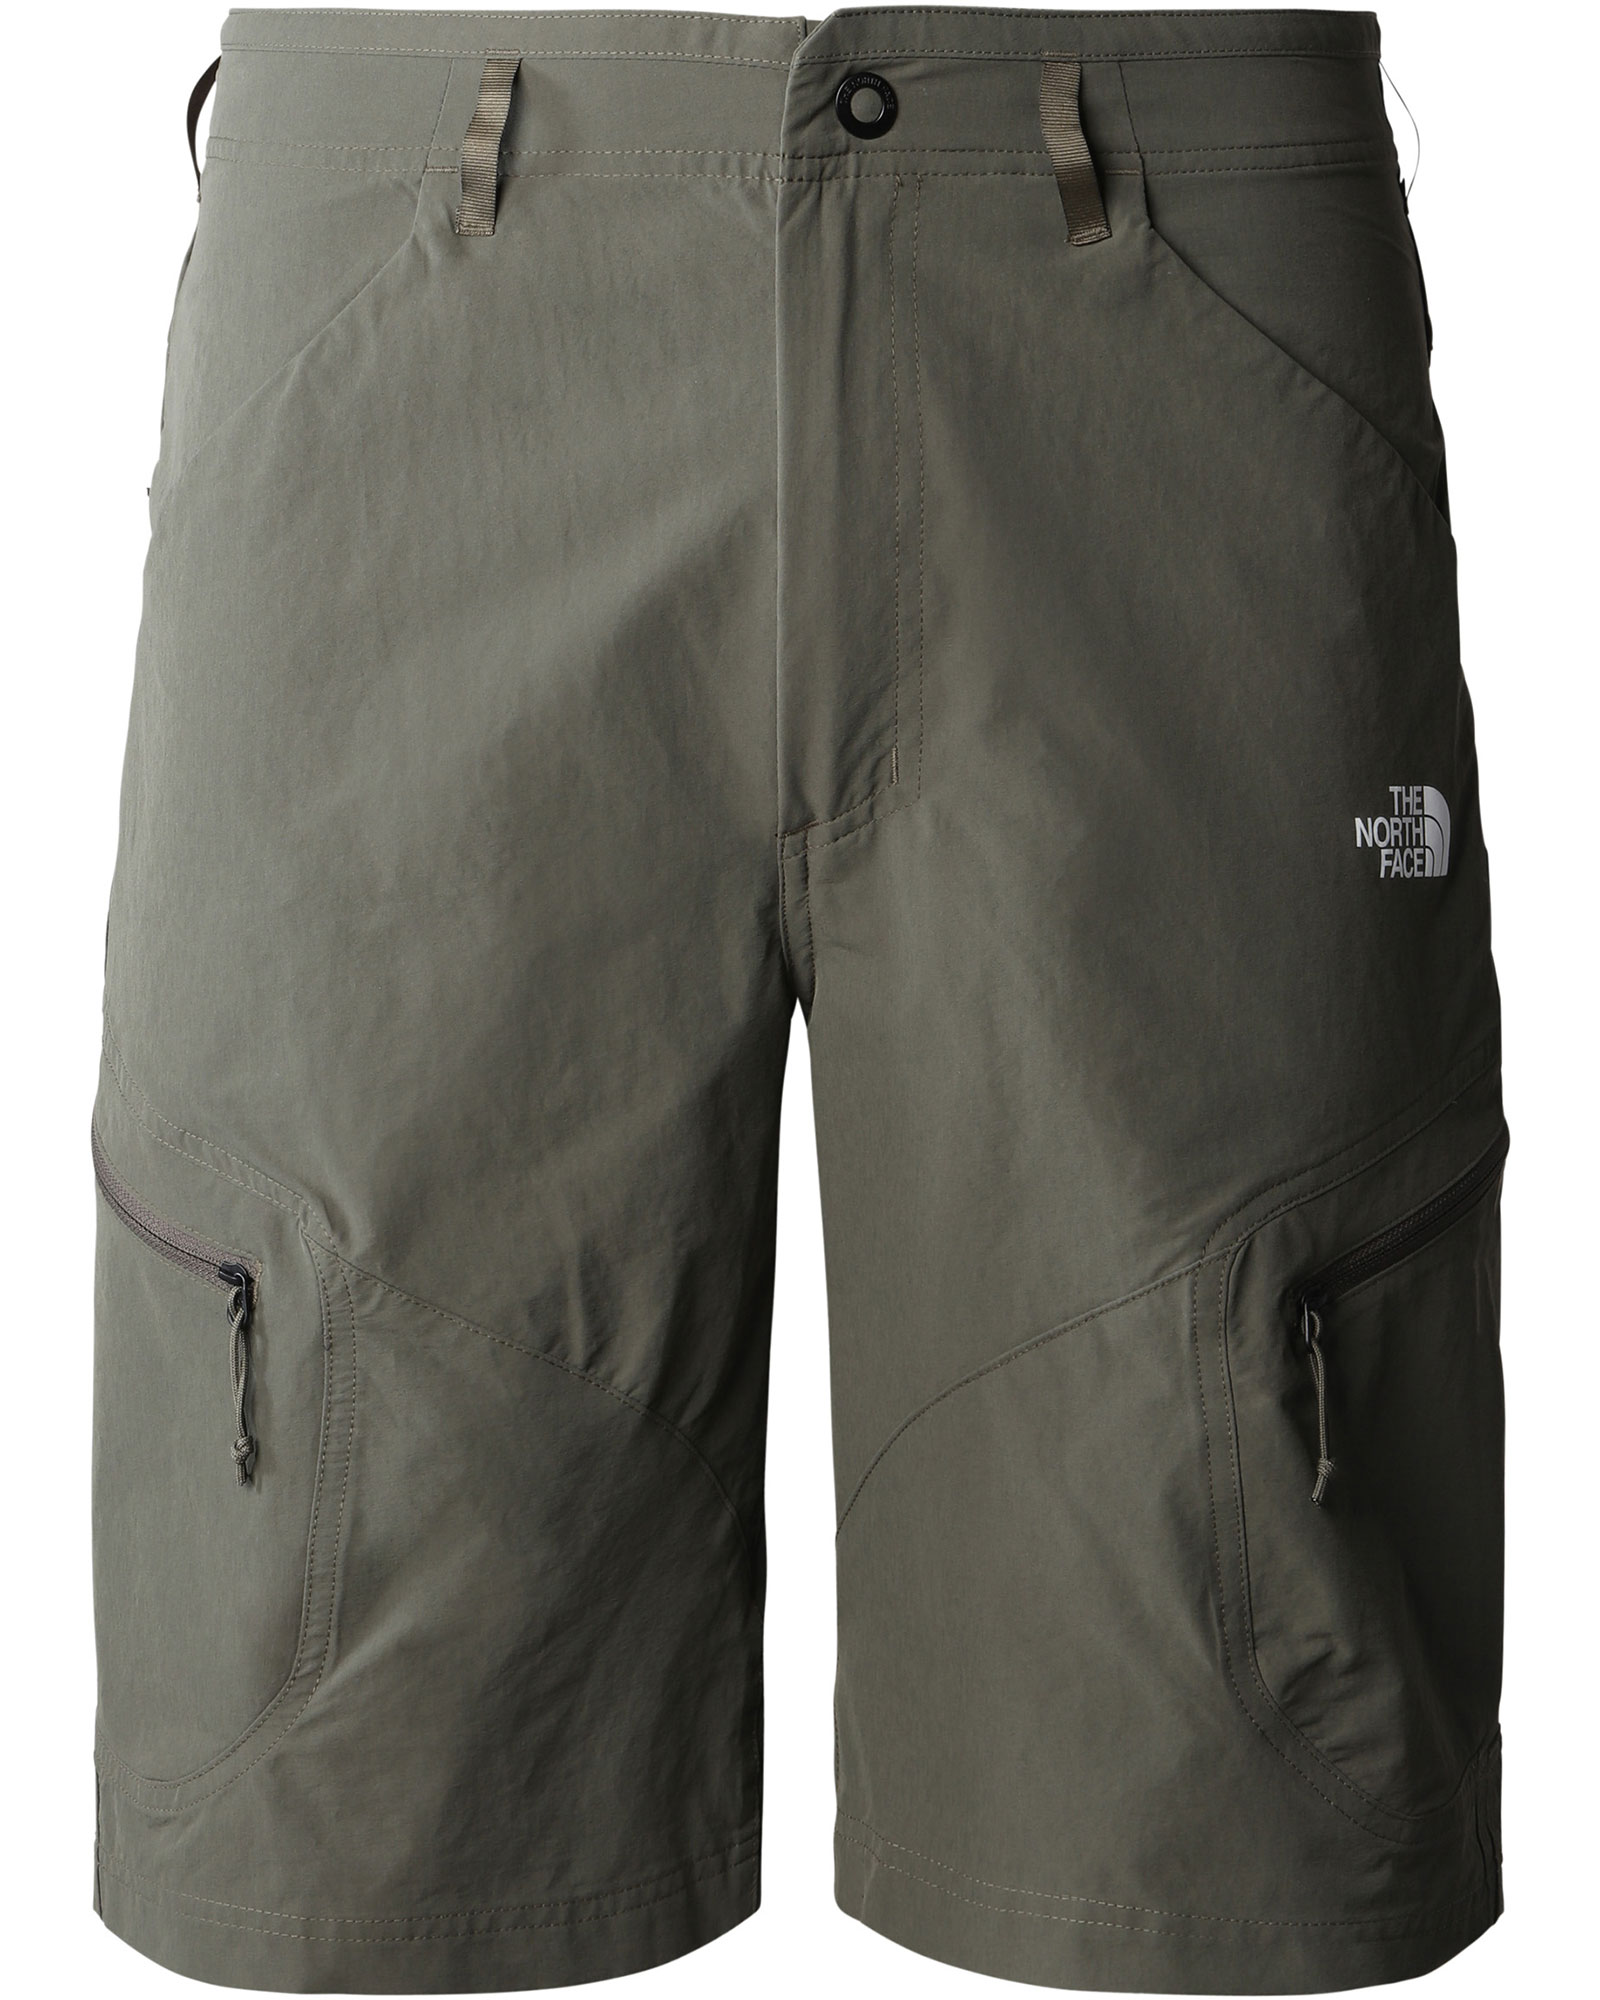 The North Face Men’s Exploration Shorts - New Taupe Green EU 38